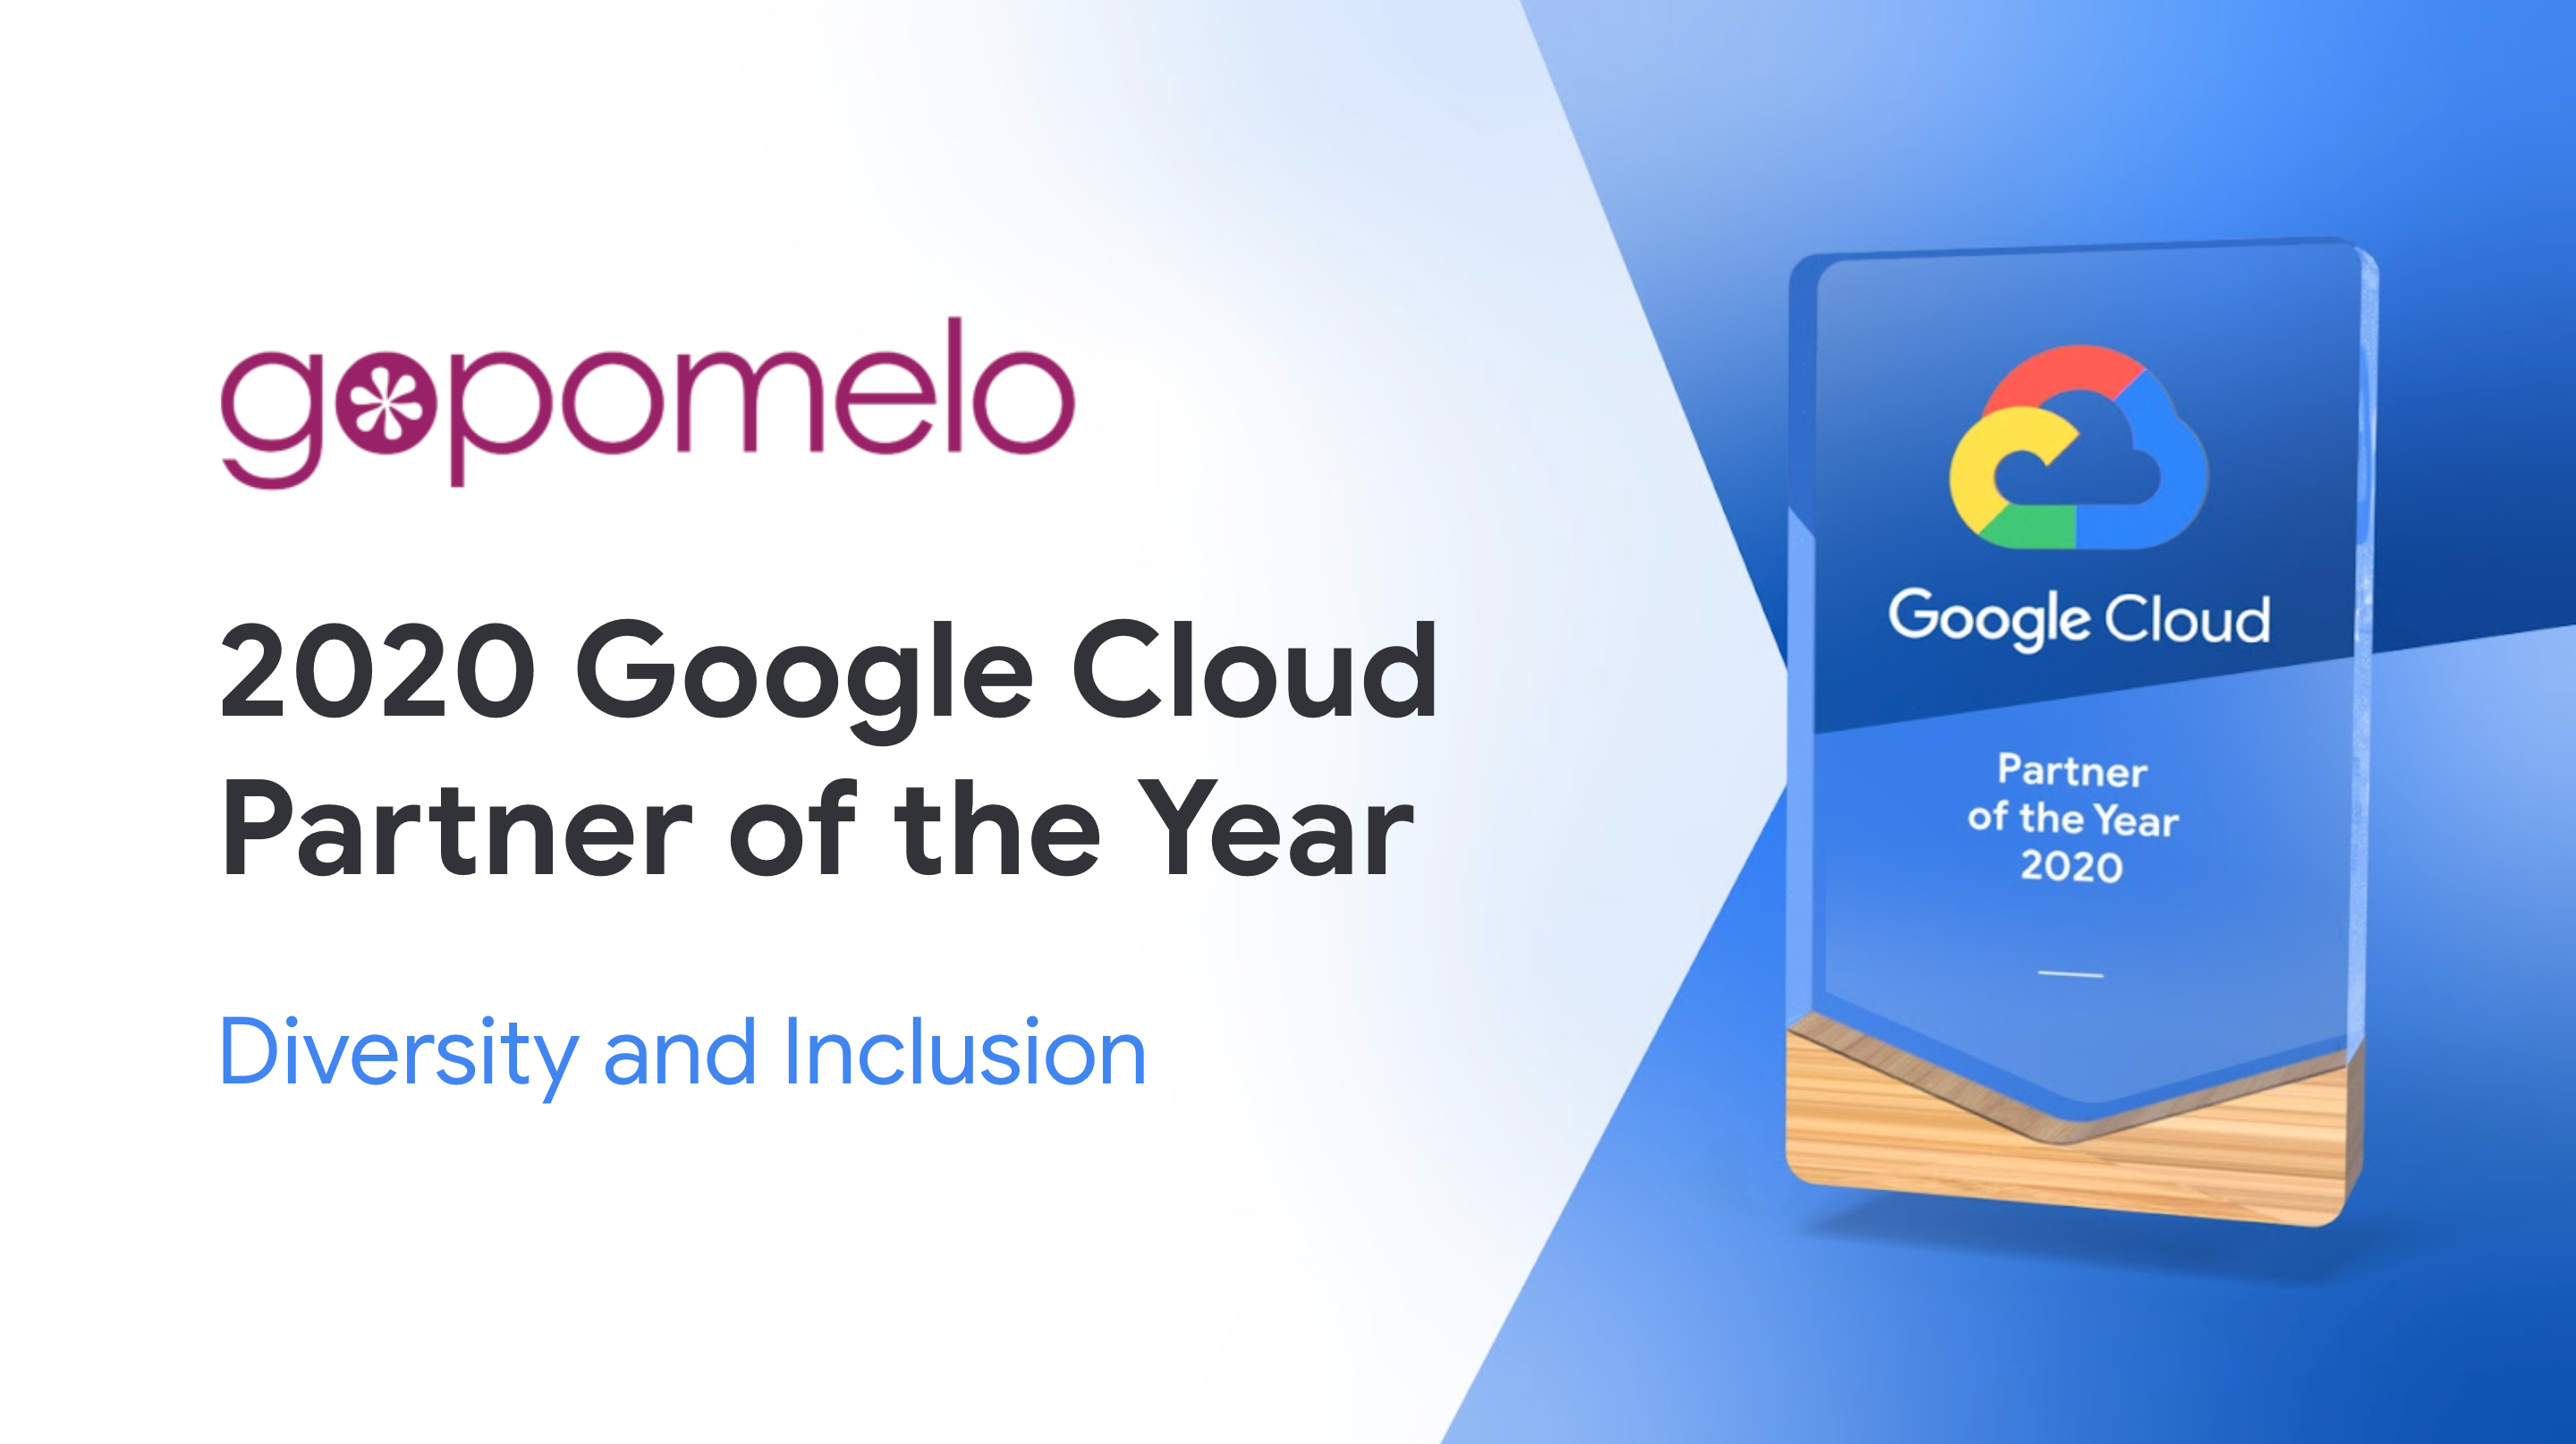 GoPomelo Wins Google Cloud’s 2020 Diversity & Inclusion Partner of the Year Award